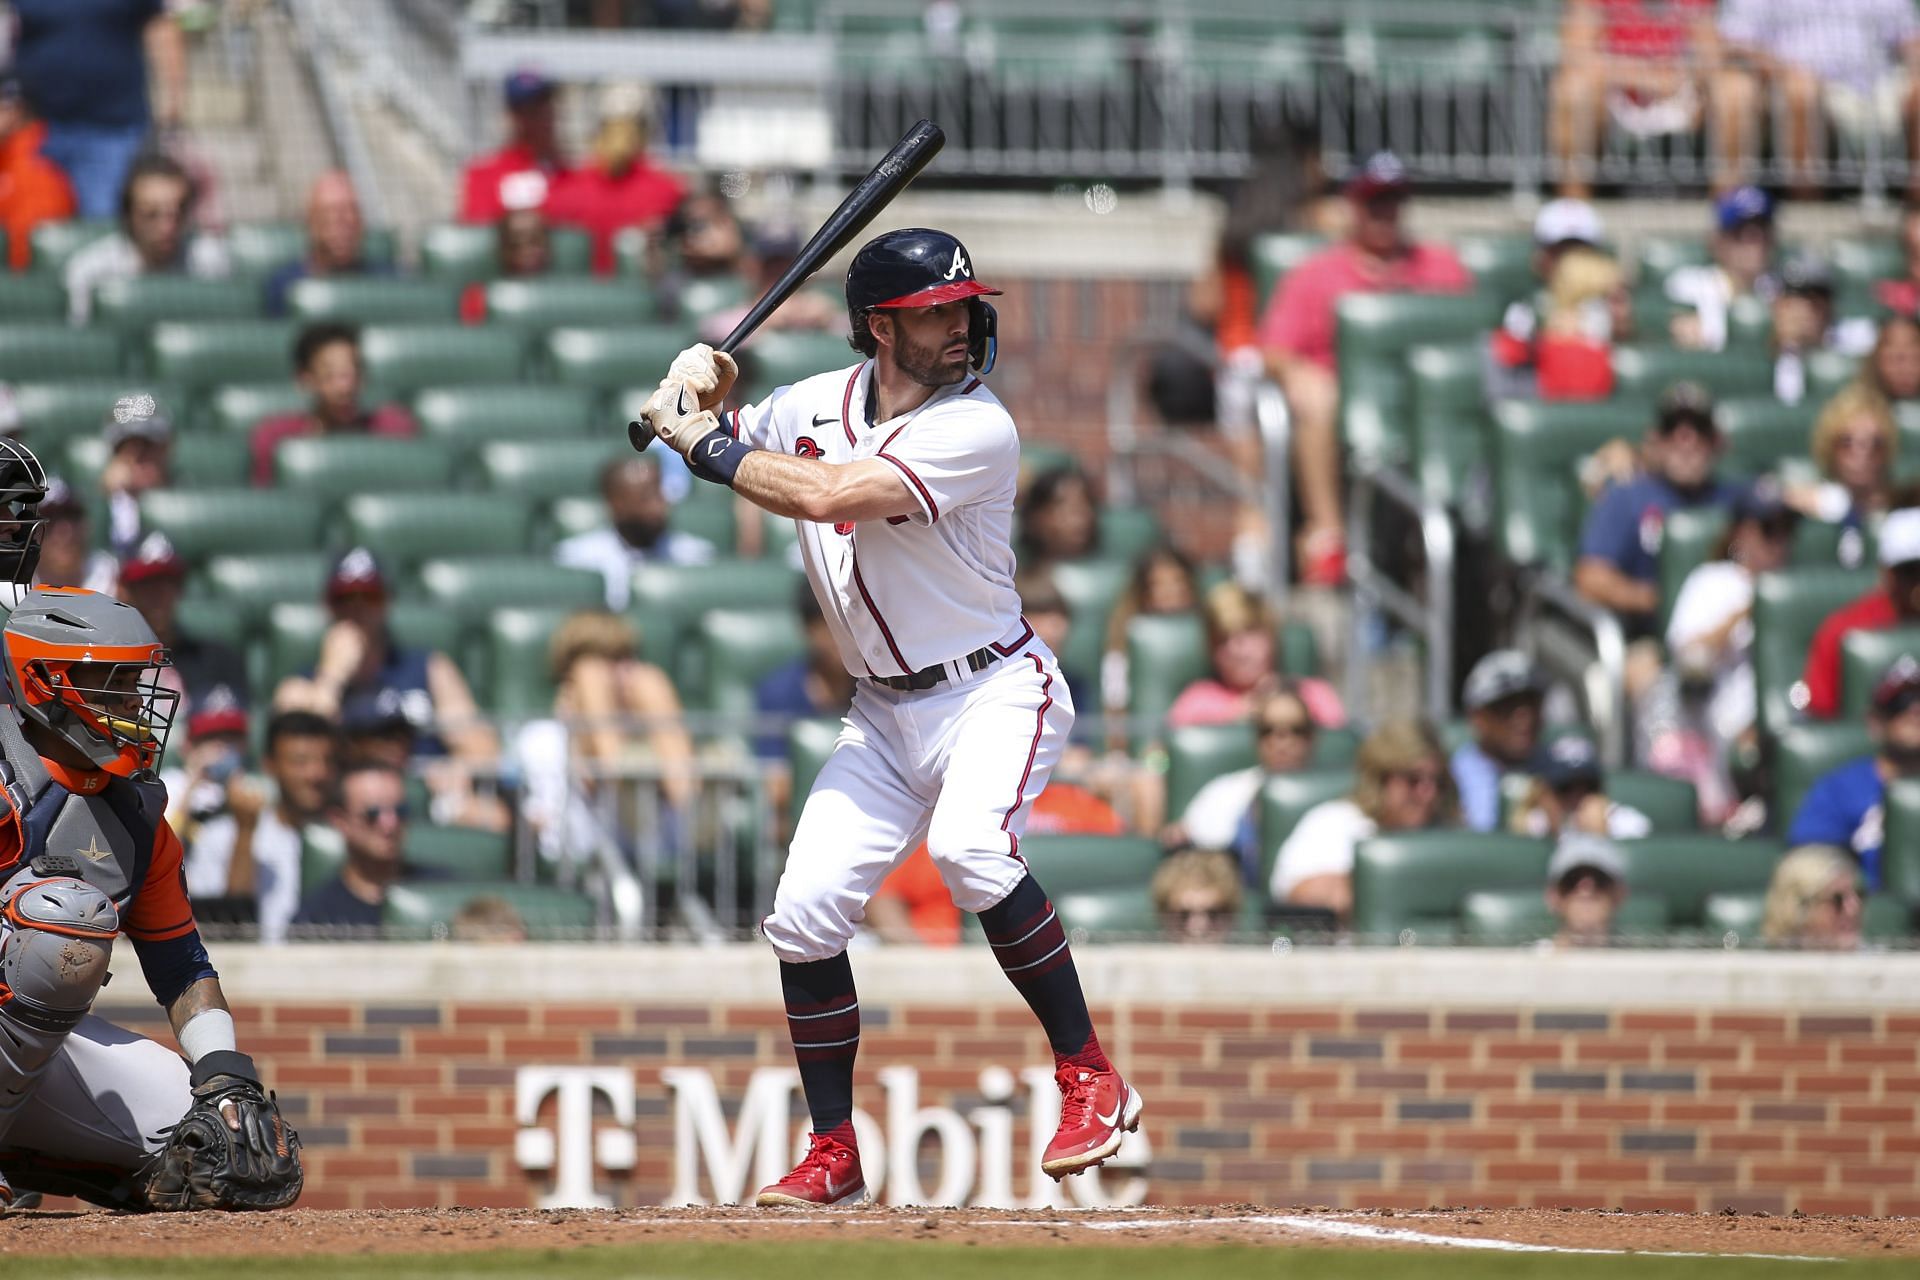 Can Dansby Swanson Stay This Good All Season? - Cubs - North Side Baseball